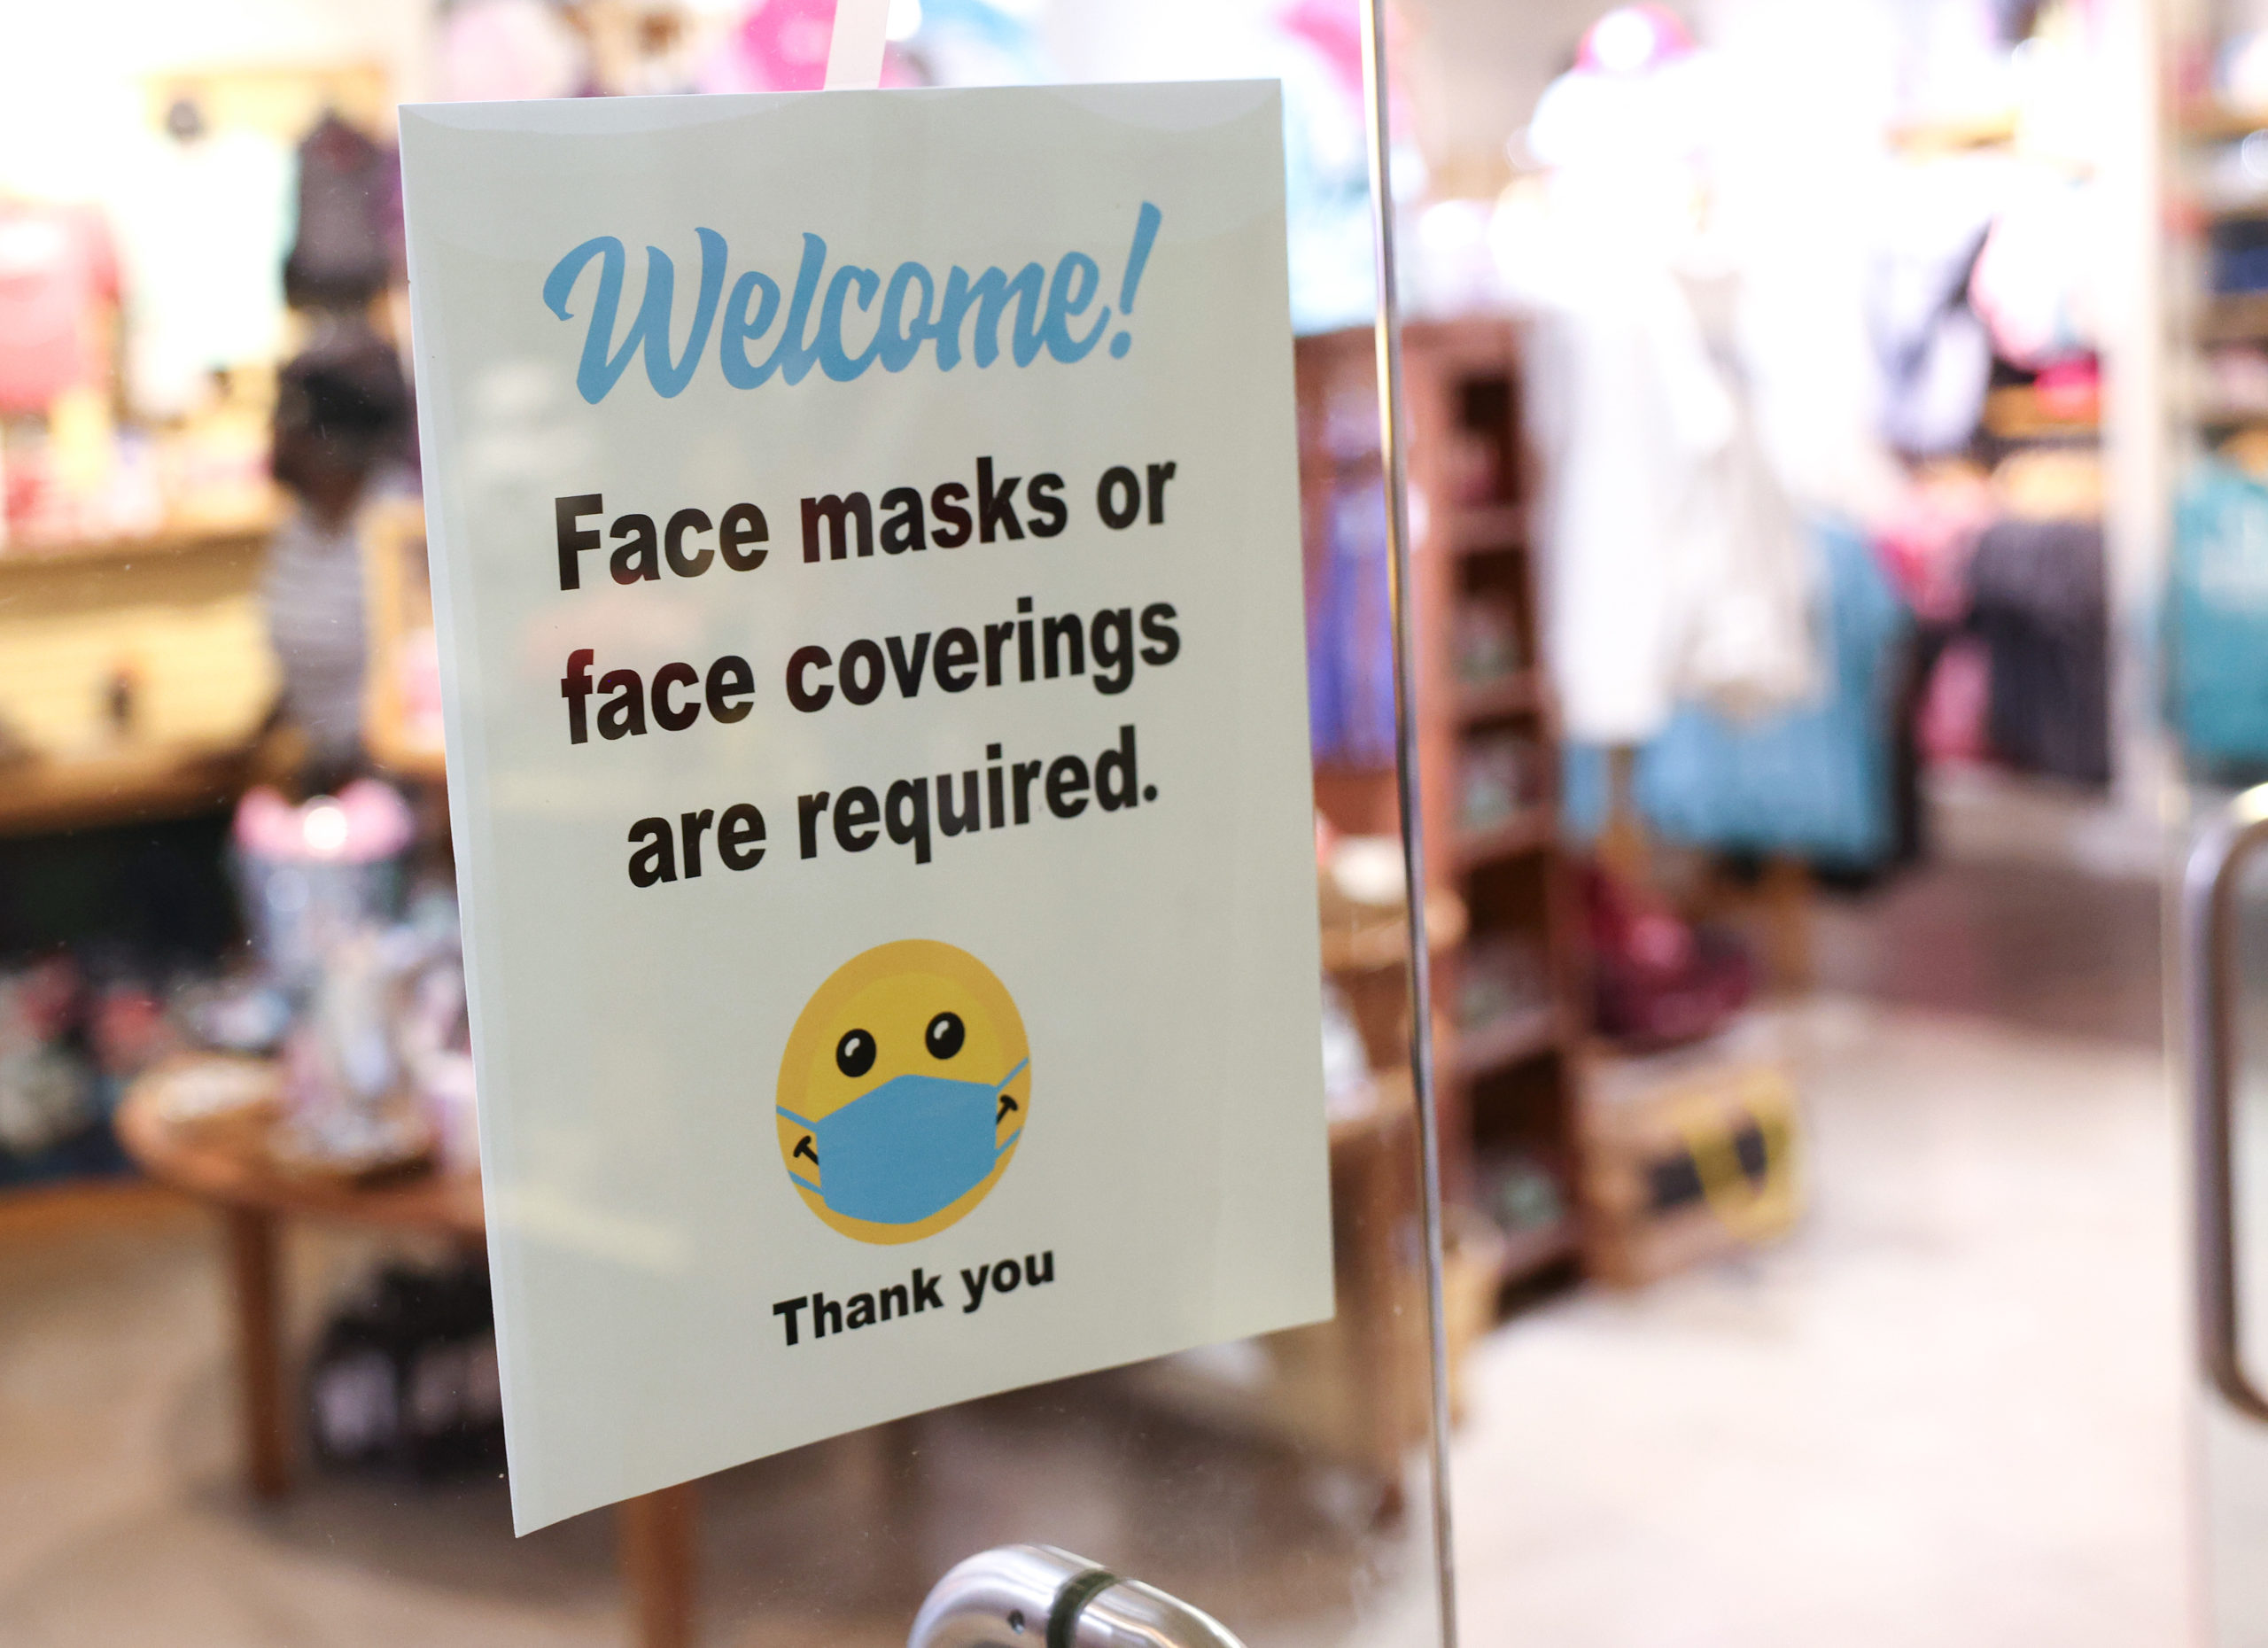 WASHINGTON, DC - JULY 30: A sign requiring mask use is seen outside of a store in Union Station on July 30, 2021 in Washington, DC. DC Mayor Muriel Bowser restored a COVID-19 indoor mask mandate, regardless of vaccination status, starting Saturday. (Photo by Kevin Dietsch/Getty Images)